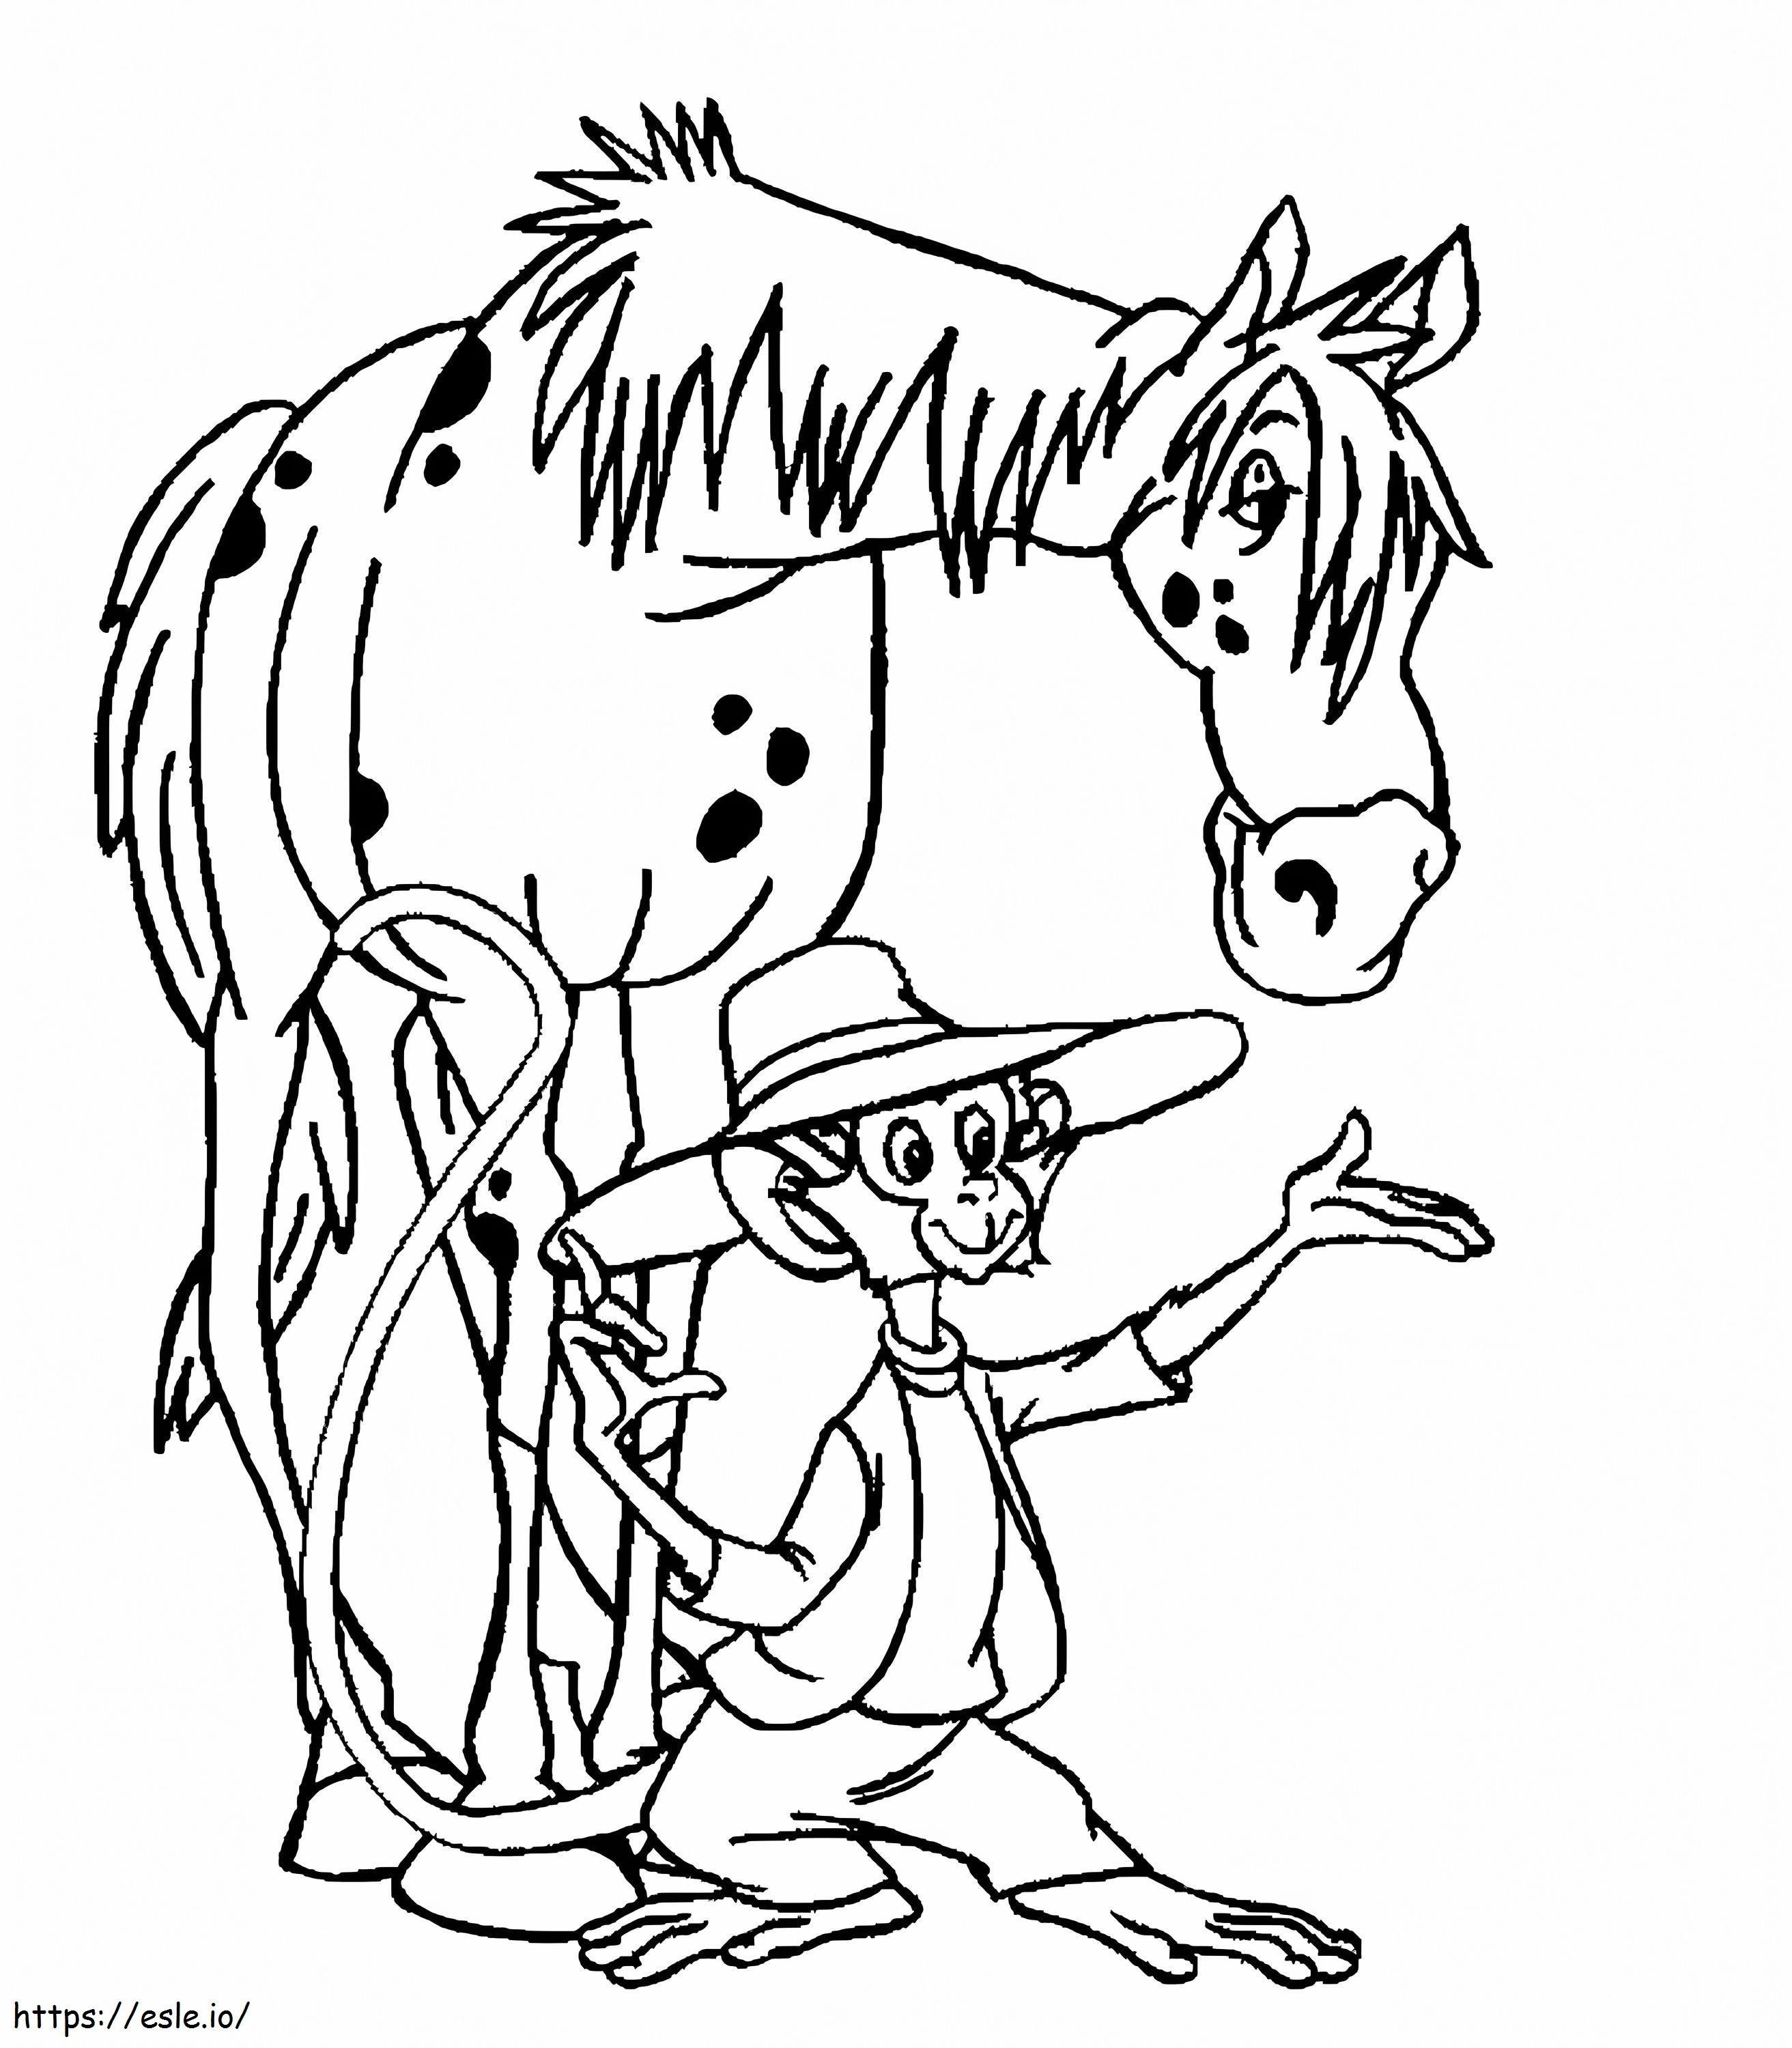 Mr Nilsson And Horse coloring page